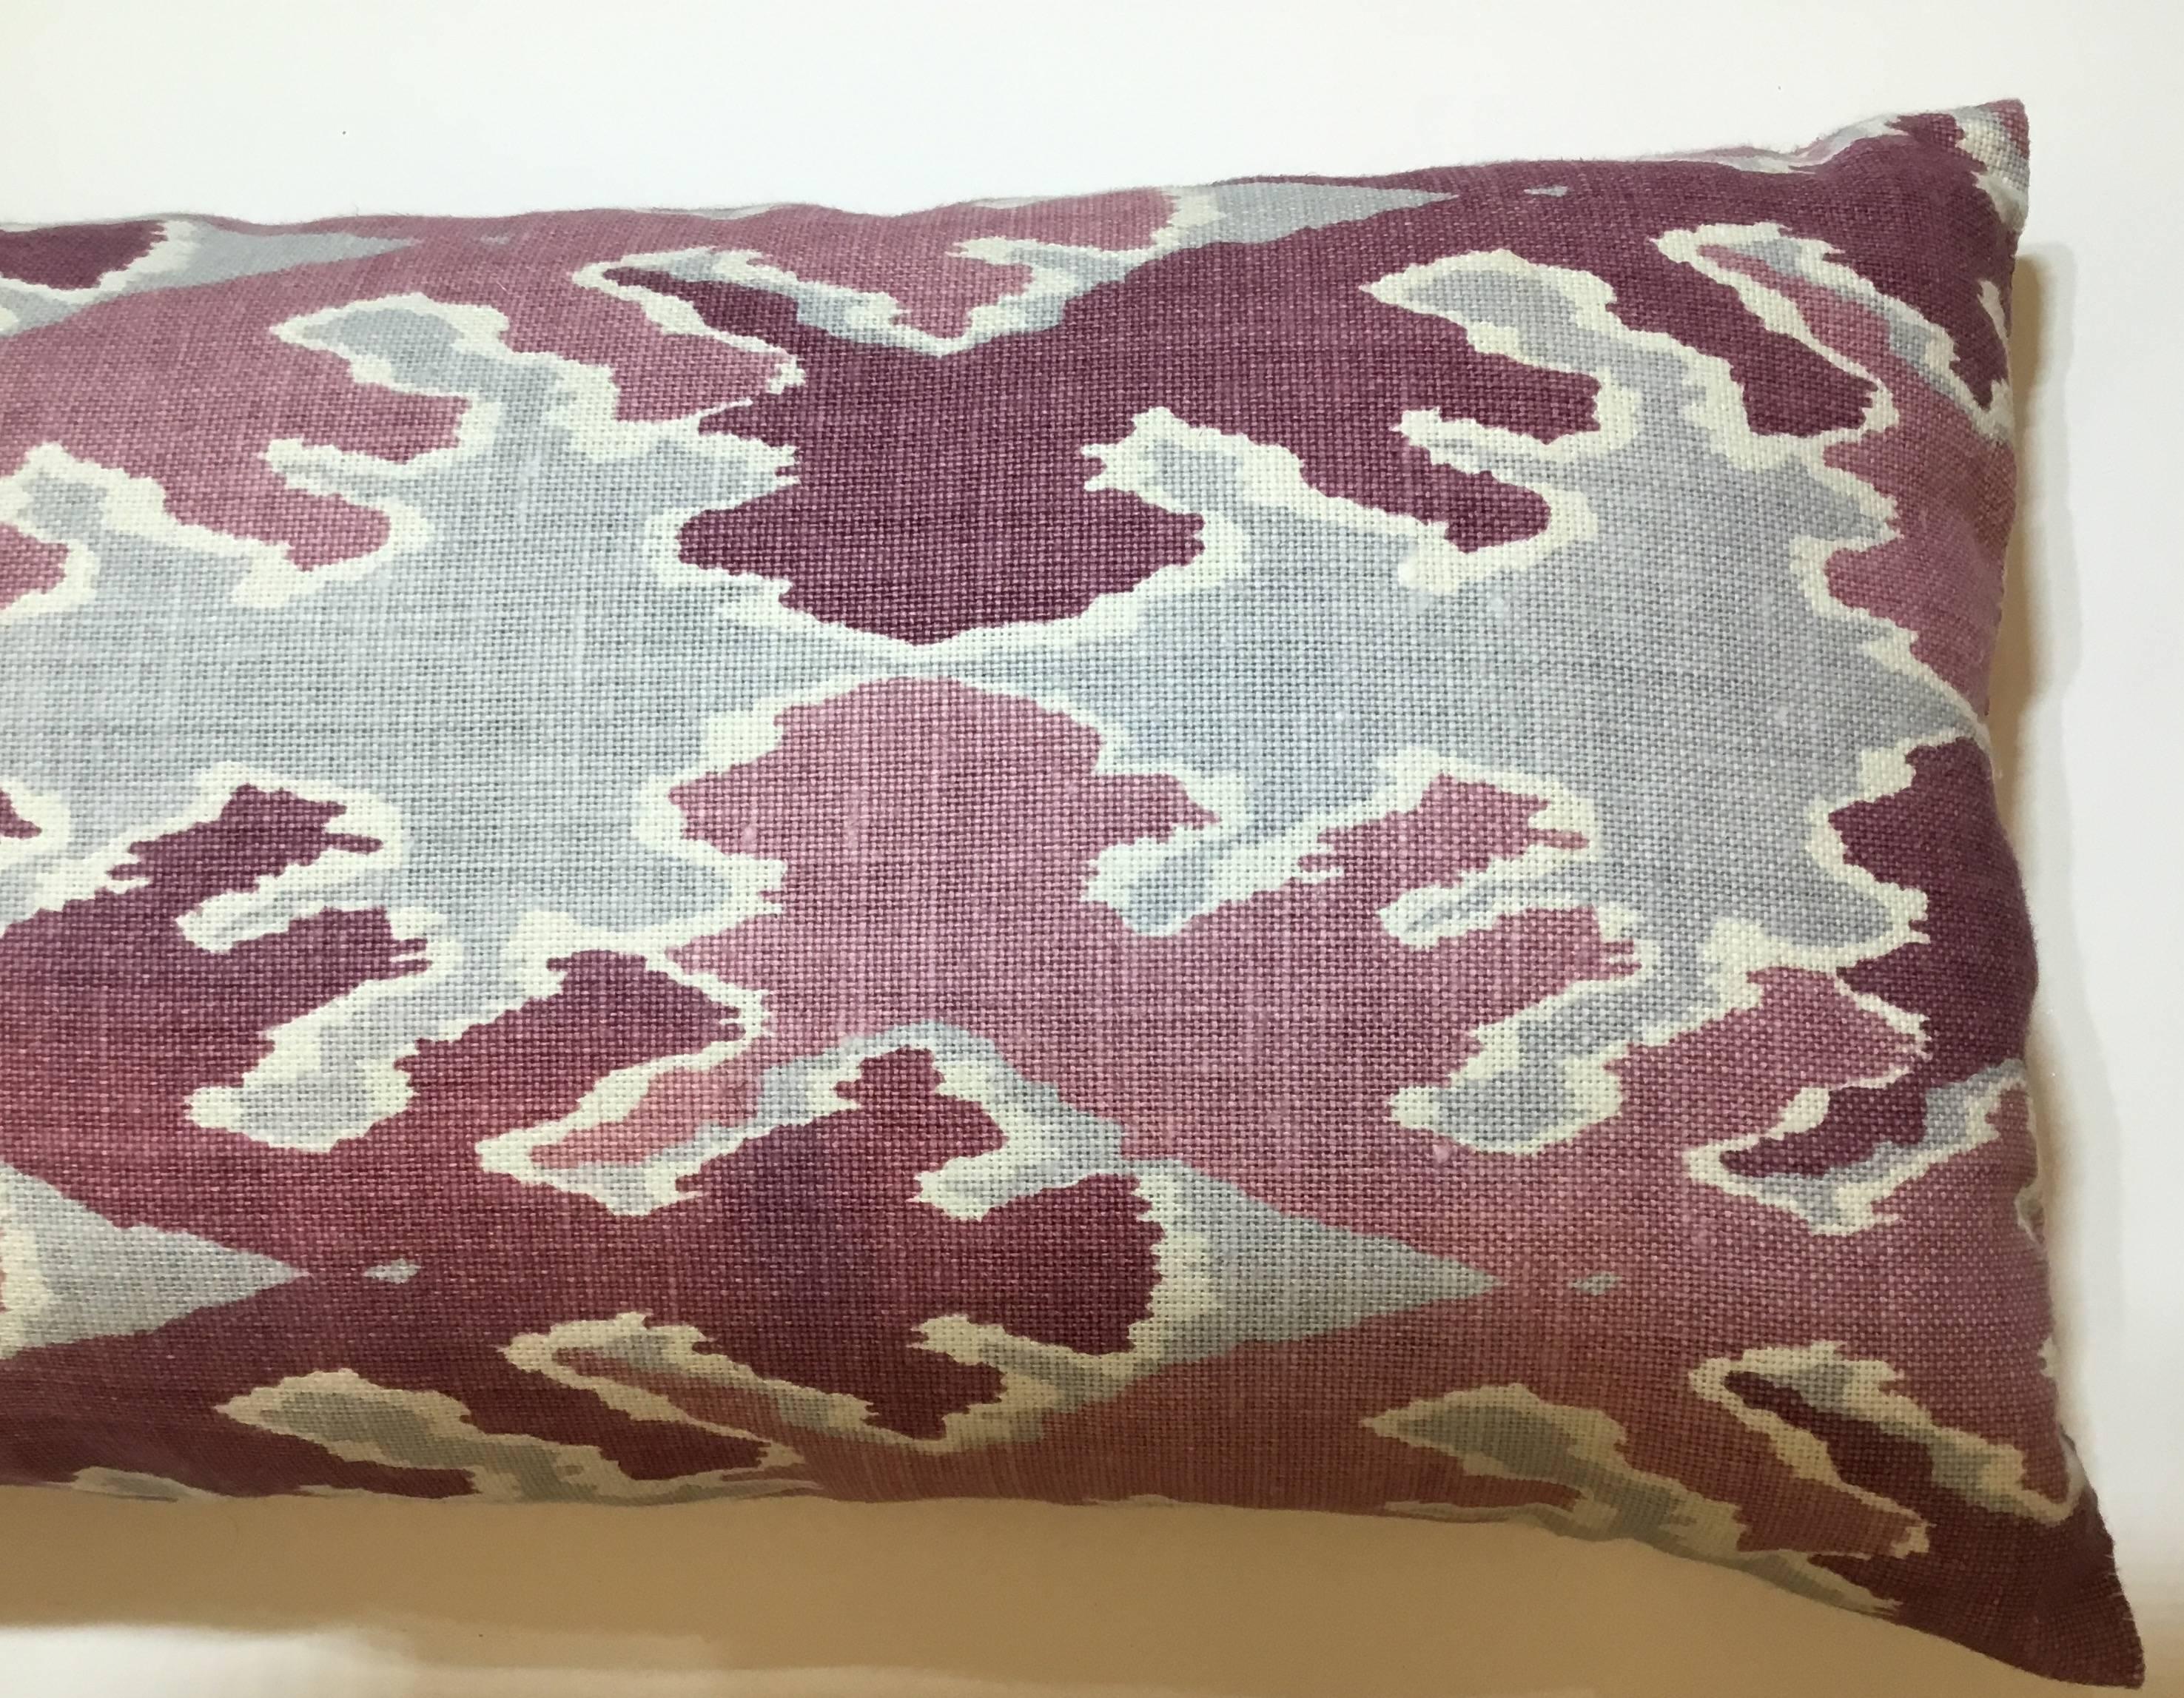 Elegant pillow made of all around Ikat pattern, with soft purple and grey colors.
Fresh insert.